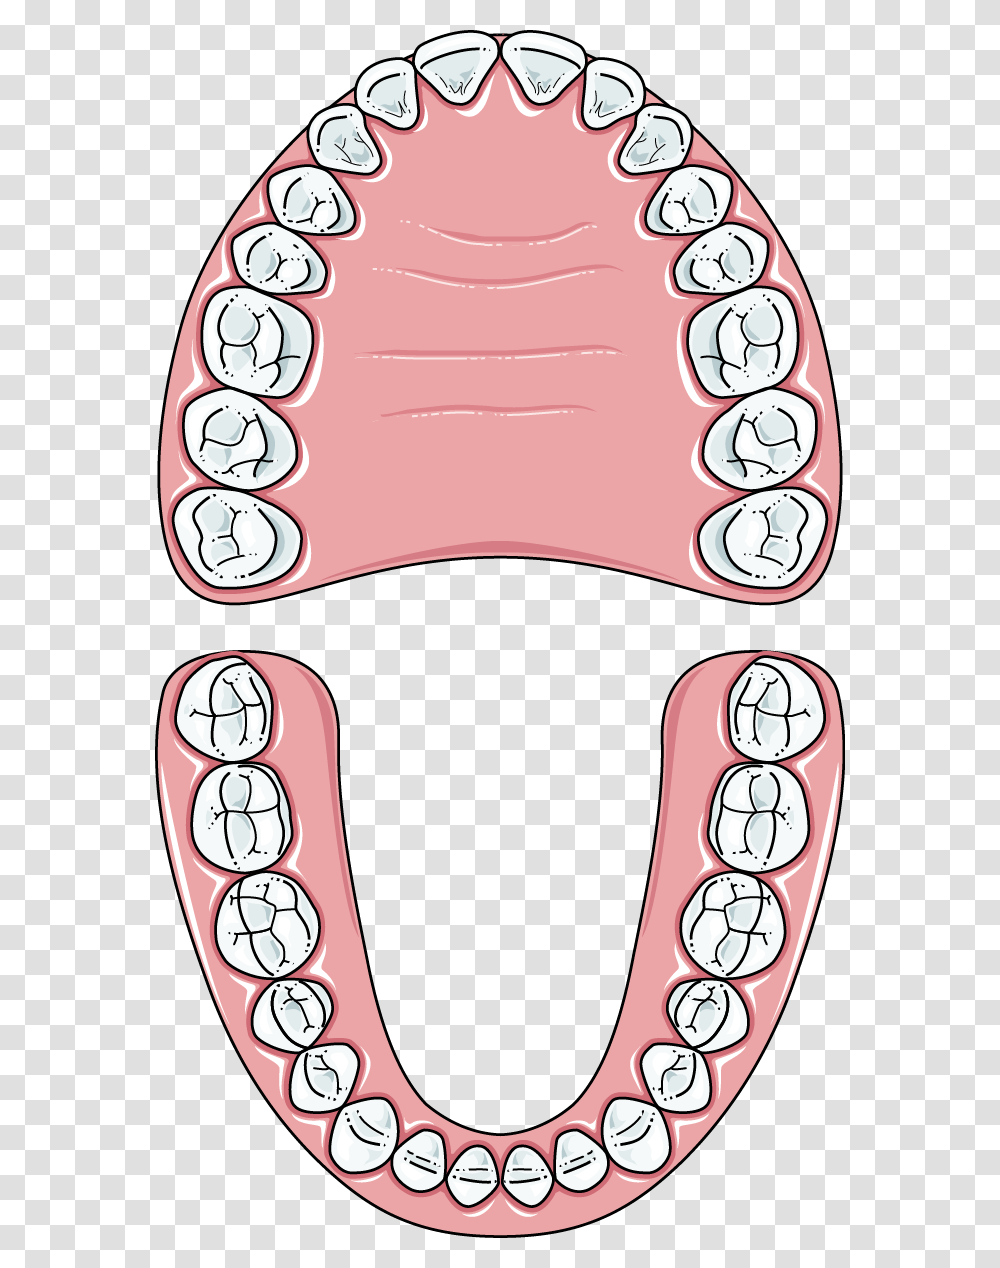 Teeth Clip Permanent Set Of Teeth Clipart, Mouth, Jaw, Interior Design, Indoors Transparent Png